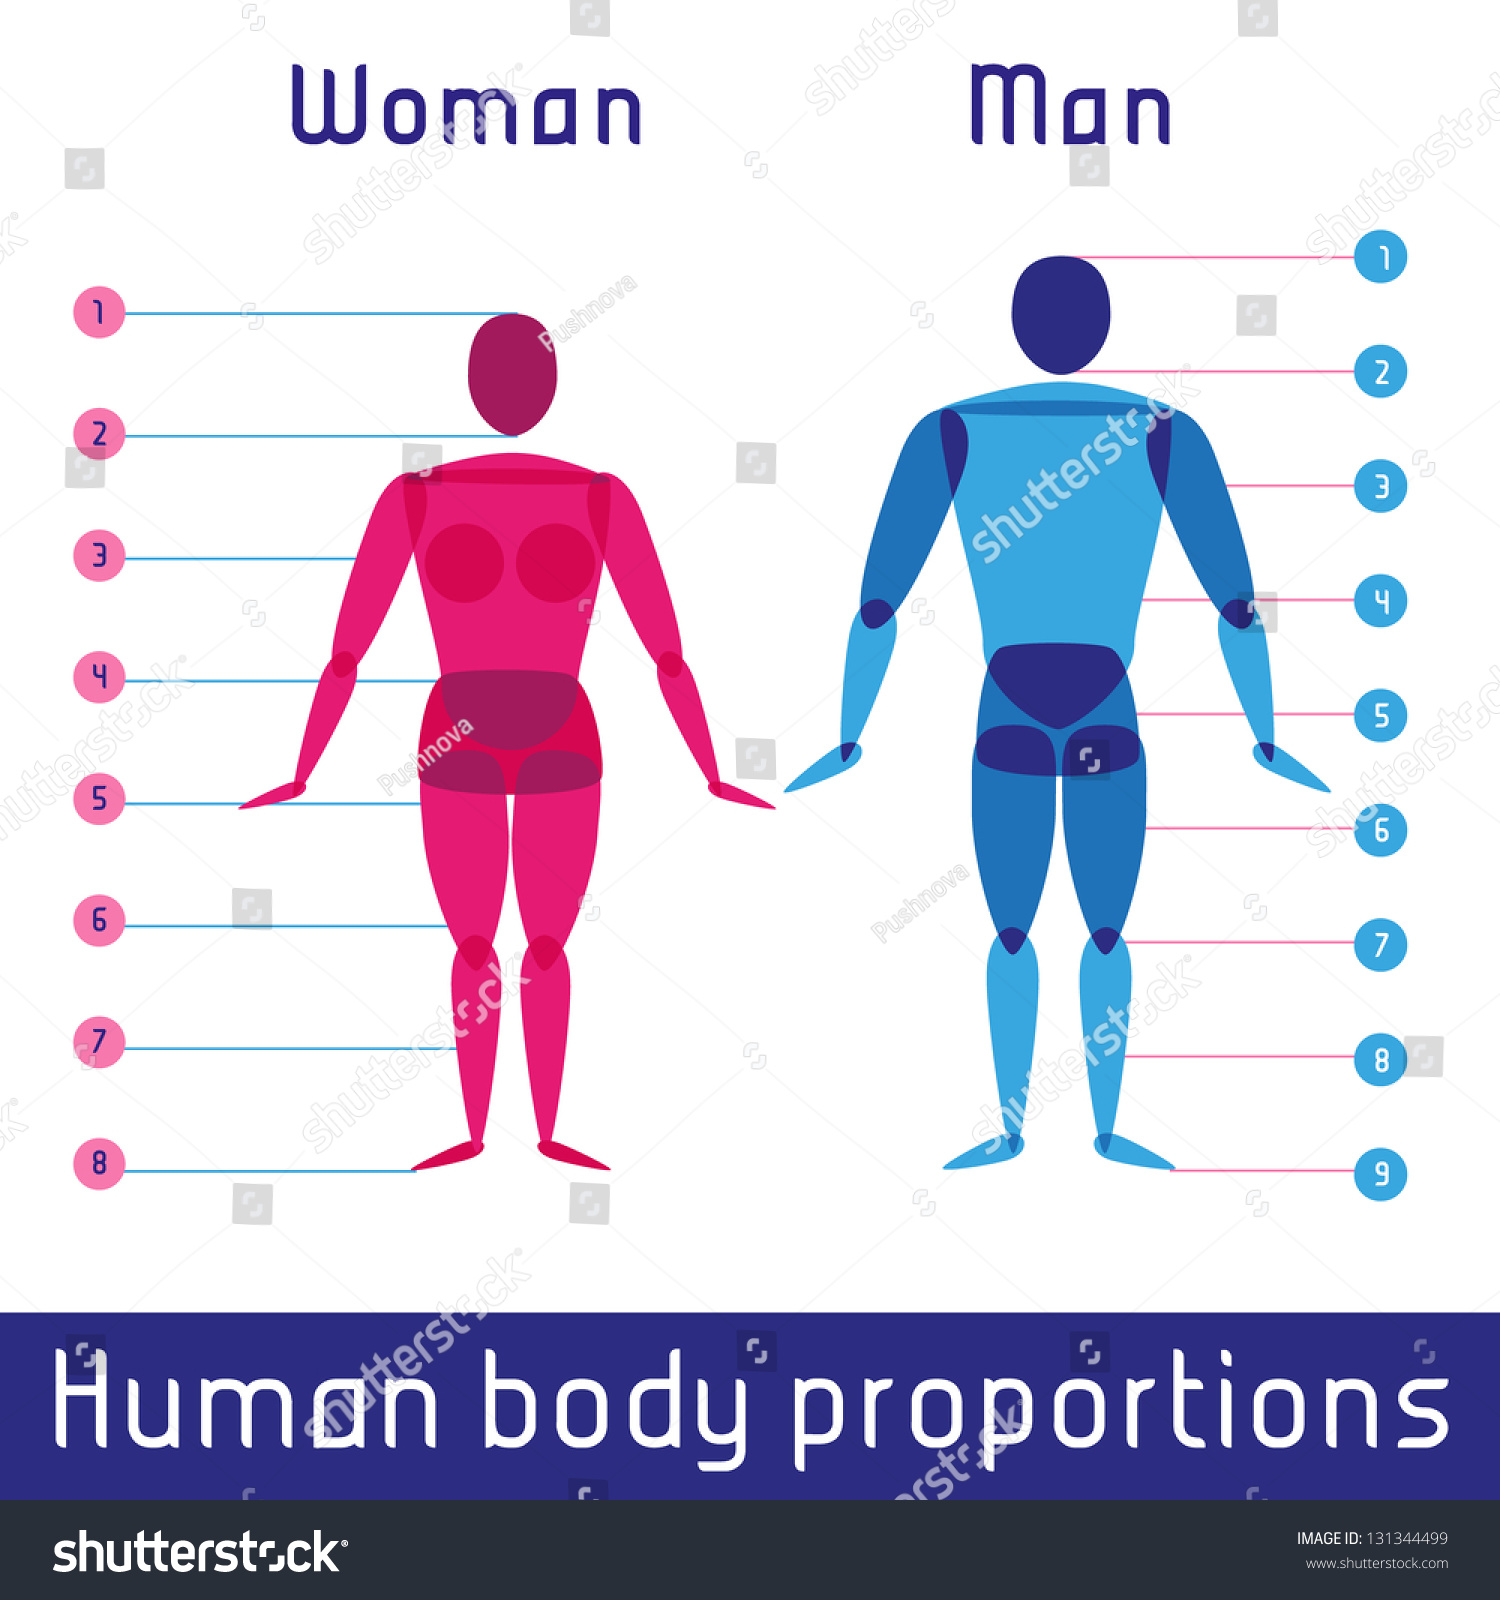 Human Body Measurements And Proportions Stock Vector Illustration